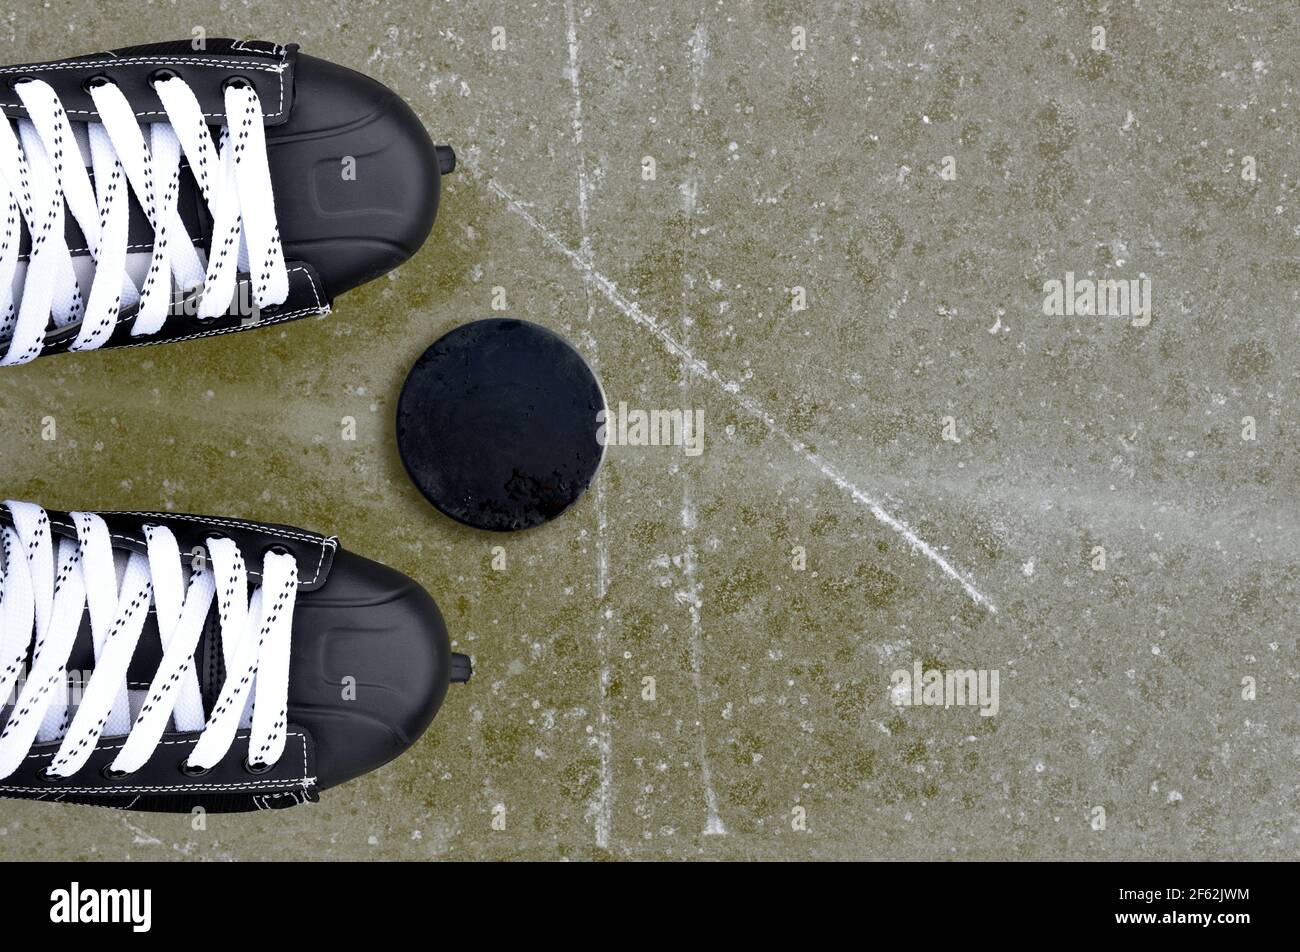 Pair of hockey skates with puck on a ice rink. Stock Photo